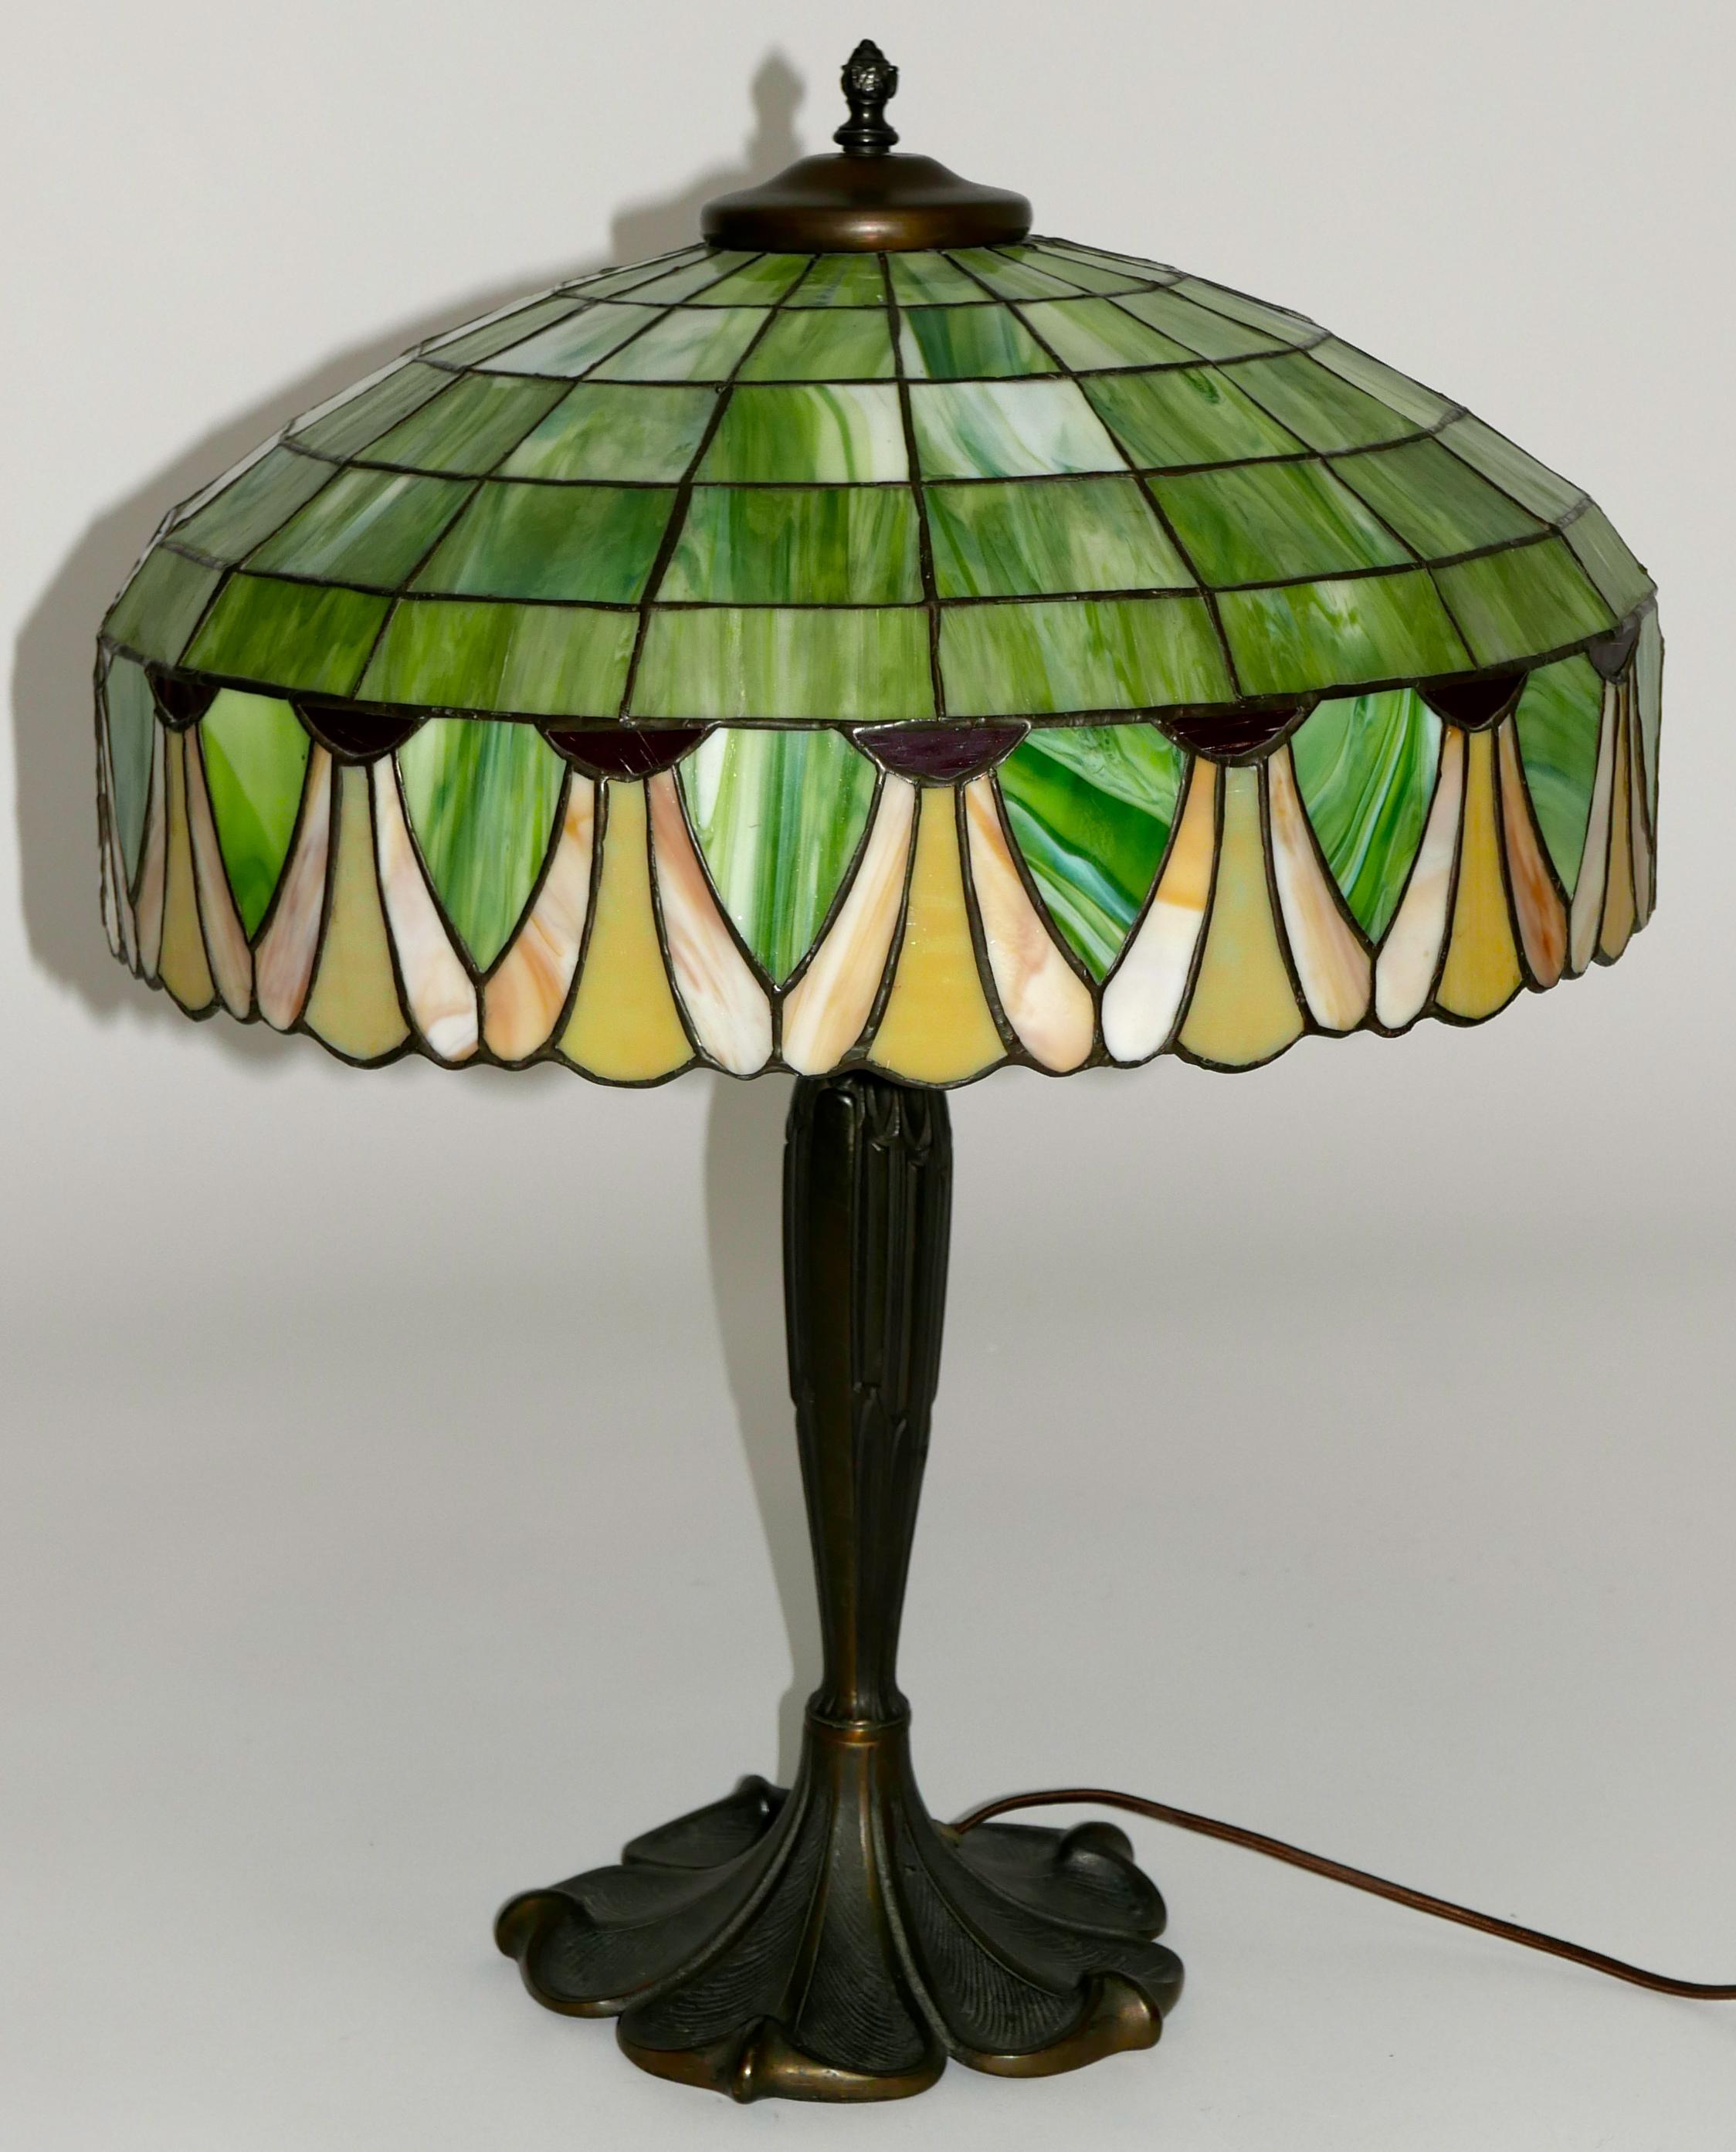 Patinated Art Nouveau Leaded Glass Table Lamp by Lamb Bros. & Greene, Early 20th Century